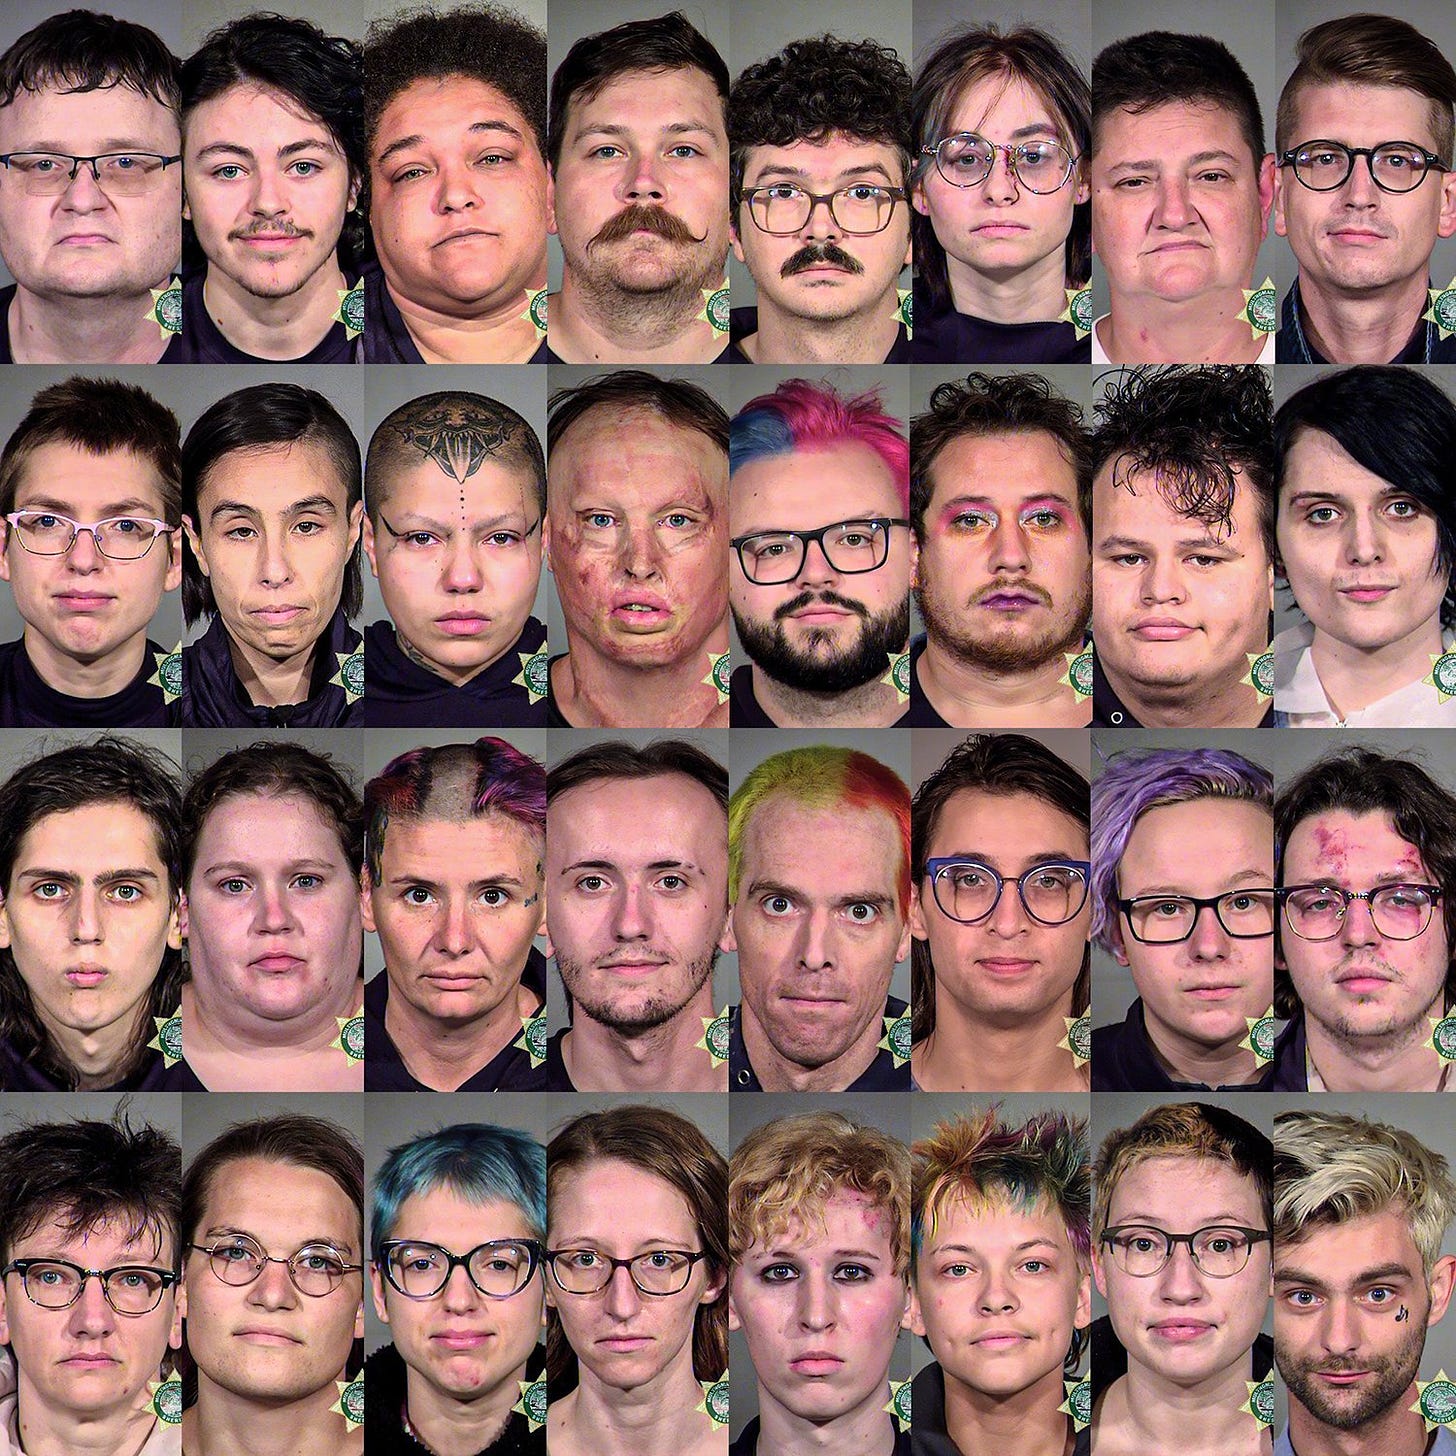 Cloyd Rivers on Twitter: "Antifa mugshots are exactly what you'd expect.  Merica. https://t.co/D55ALij1A5" / Twitter